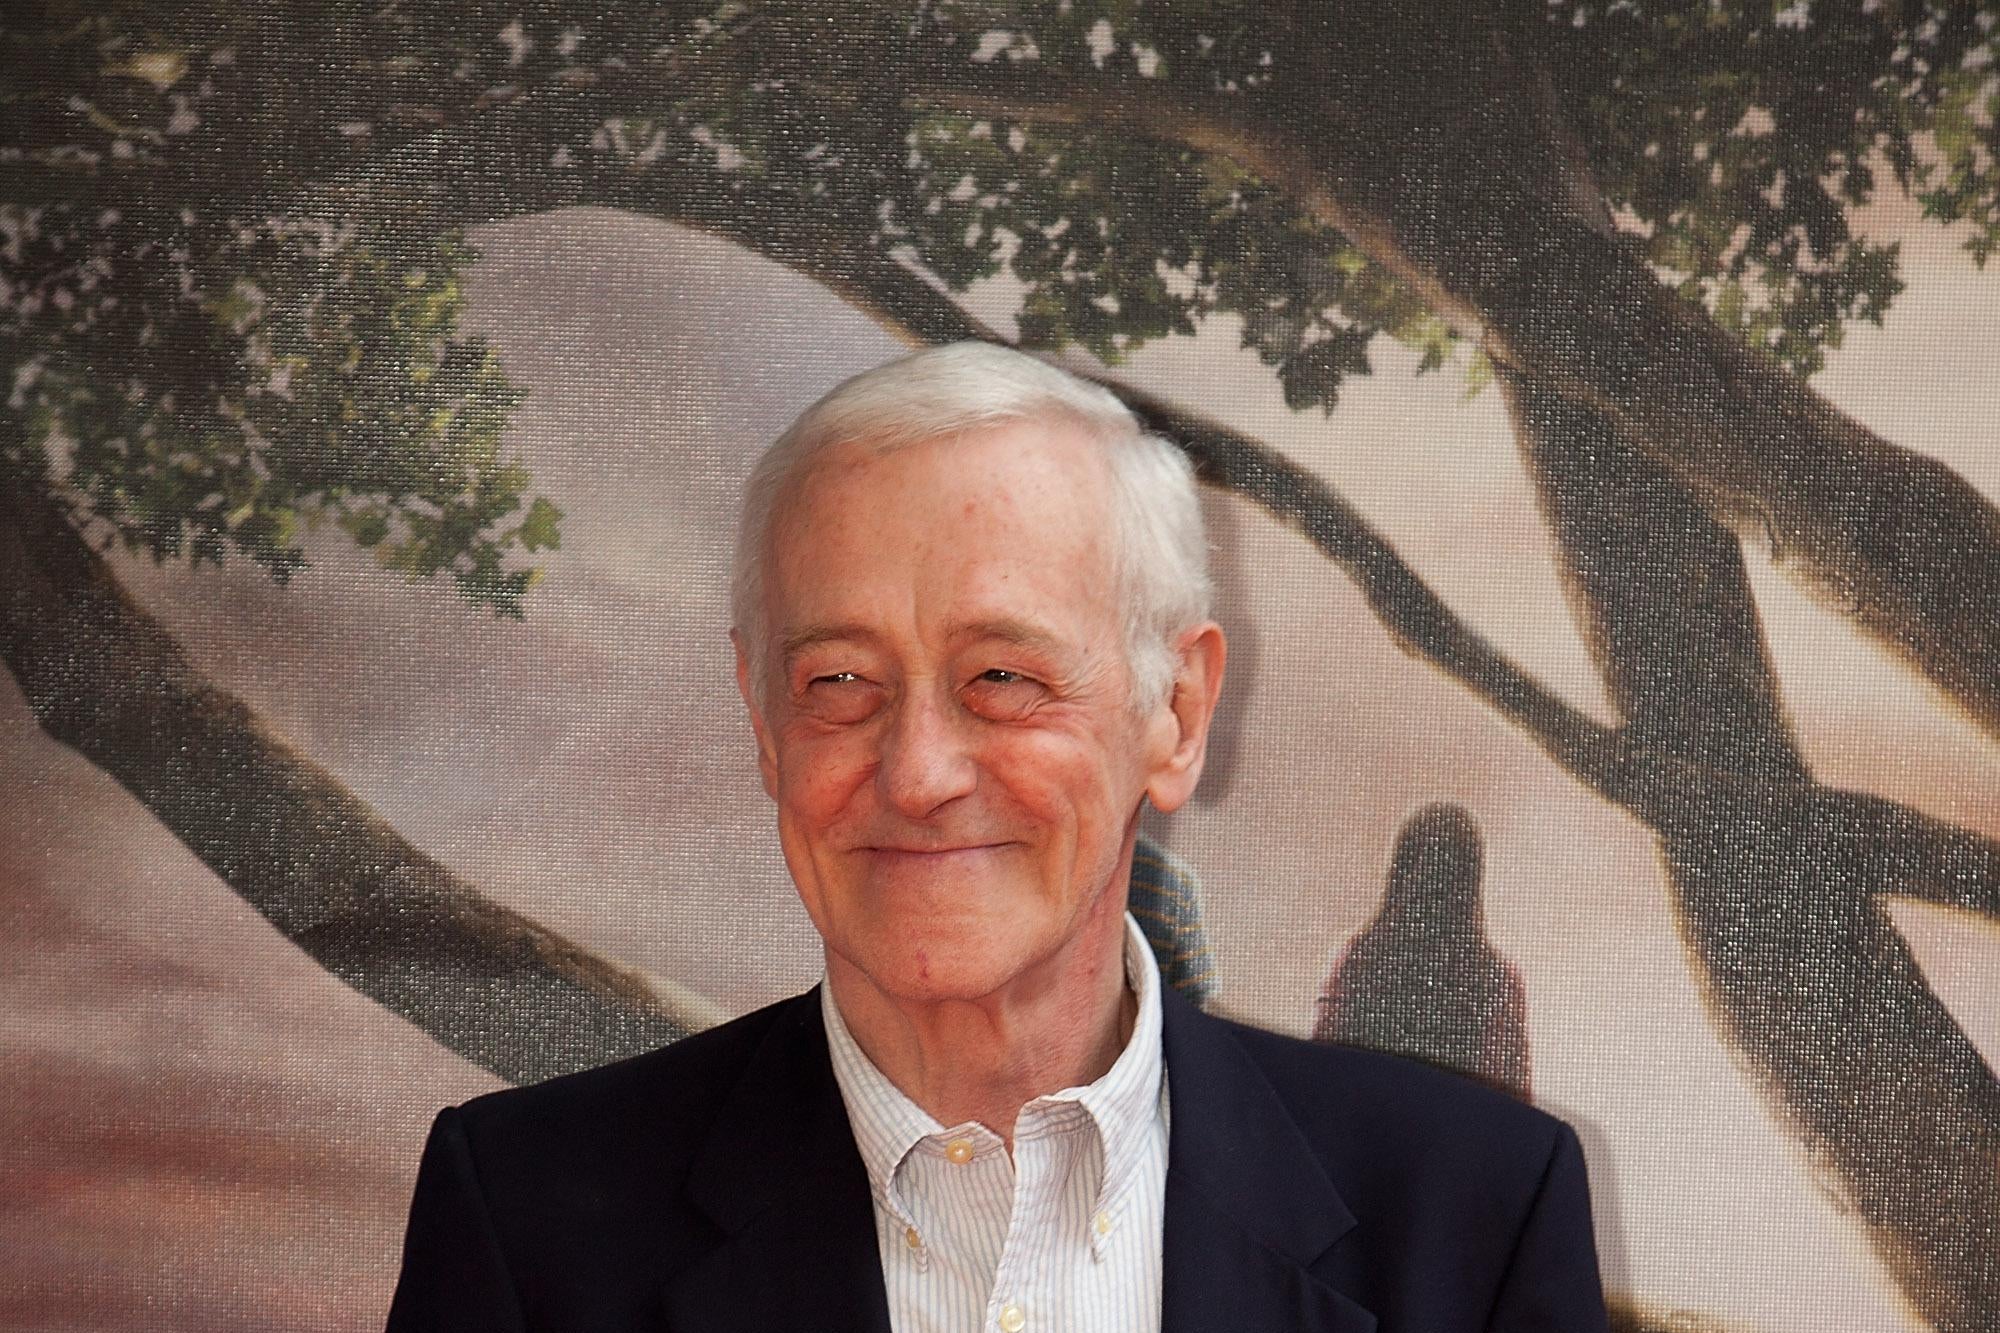  John Mahoney attends the premiere of Flipped at the Hilbert Circle Theatre in Indianapolis, Indiana, 2010.